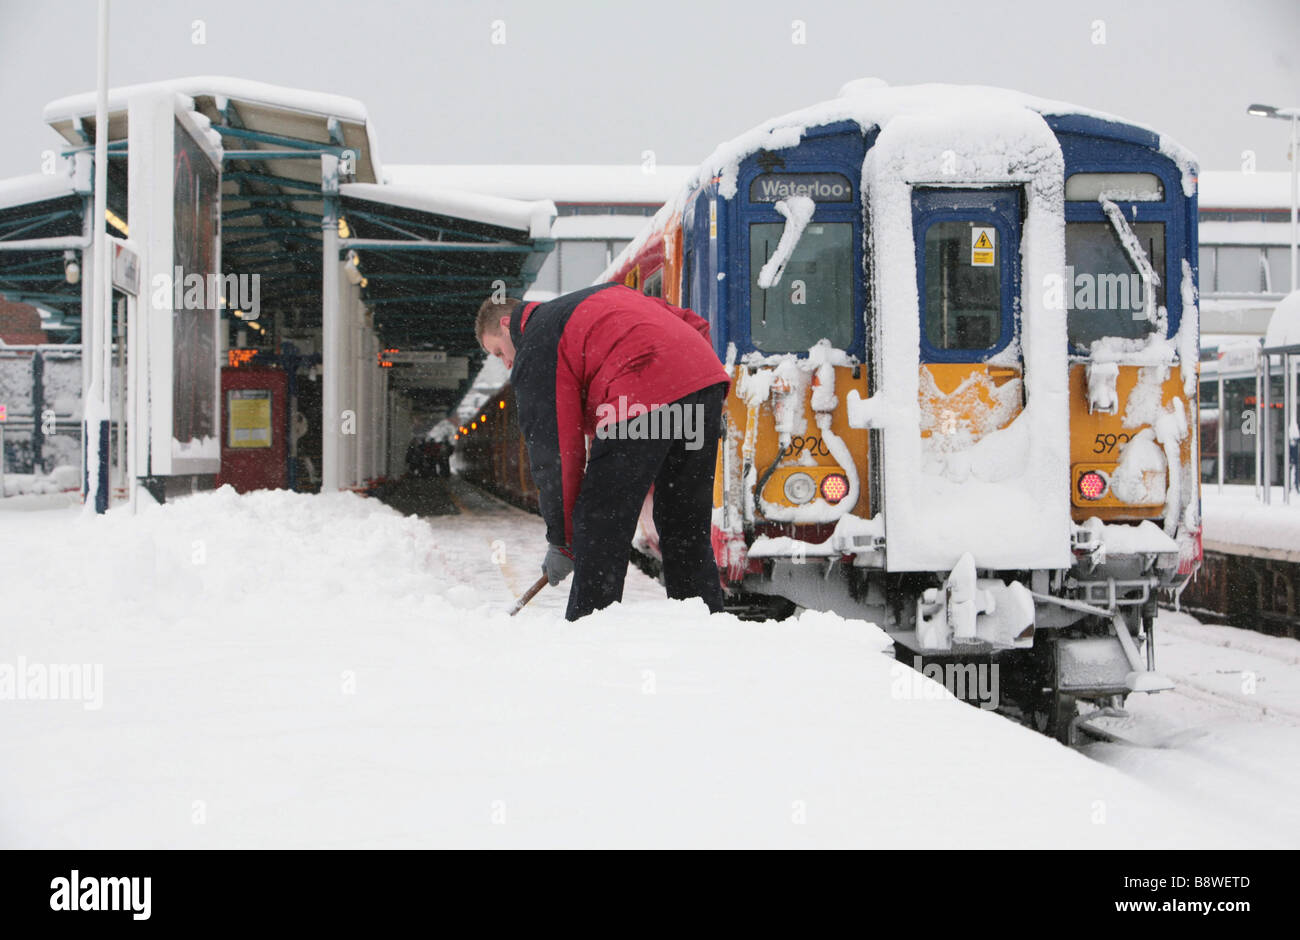 Guildford Train Station in London closed due to heavy snowfall, February 2009 Stock Photo